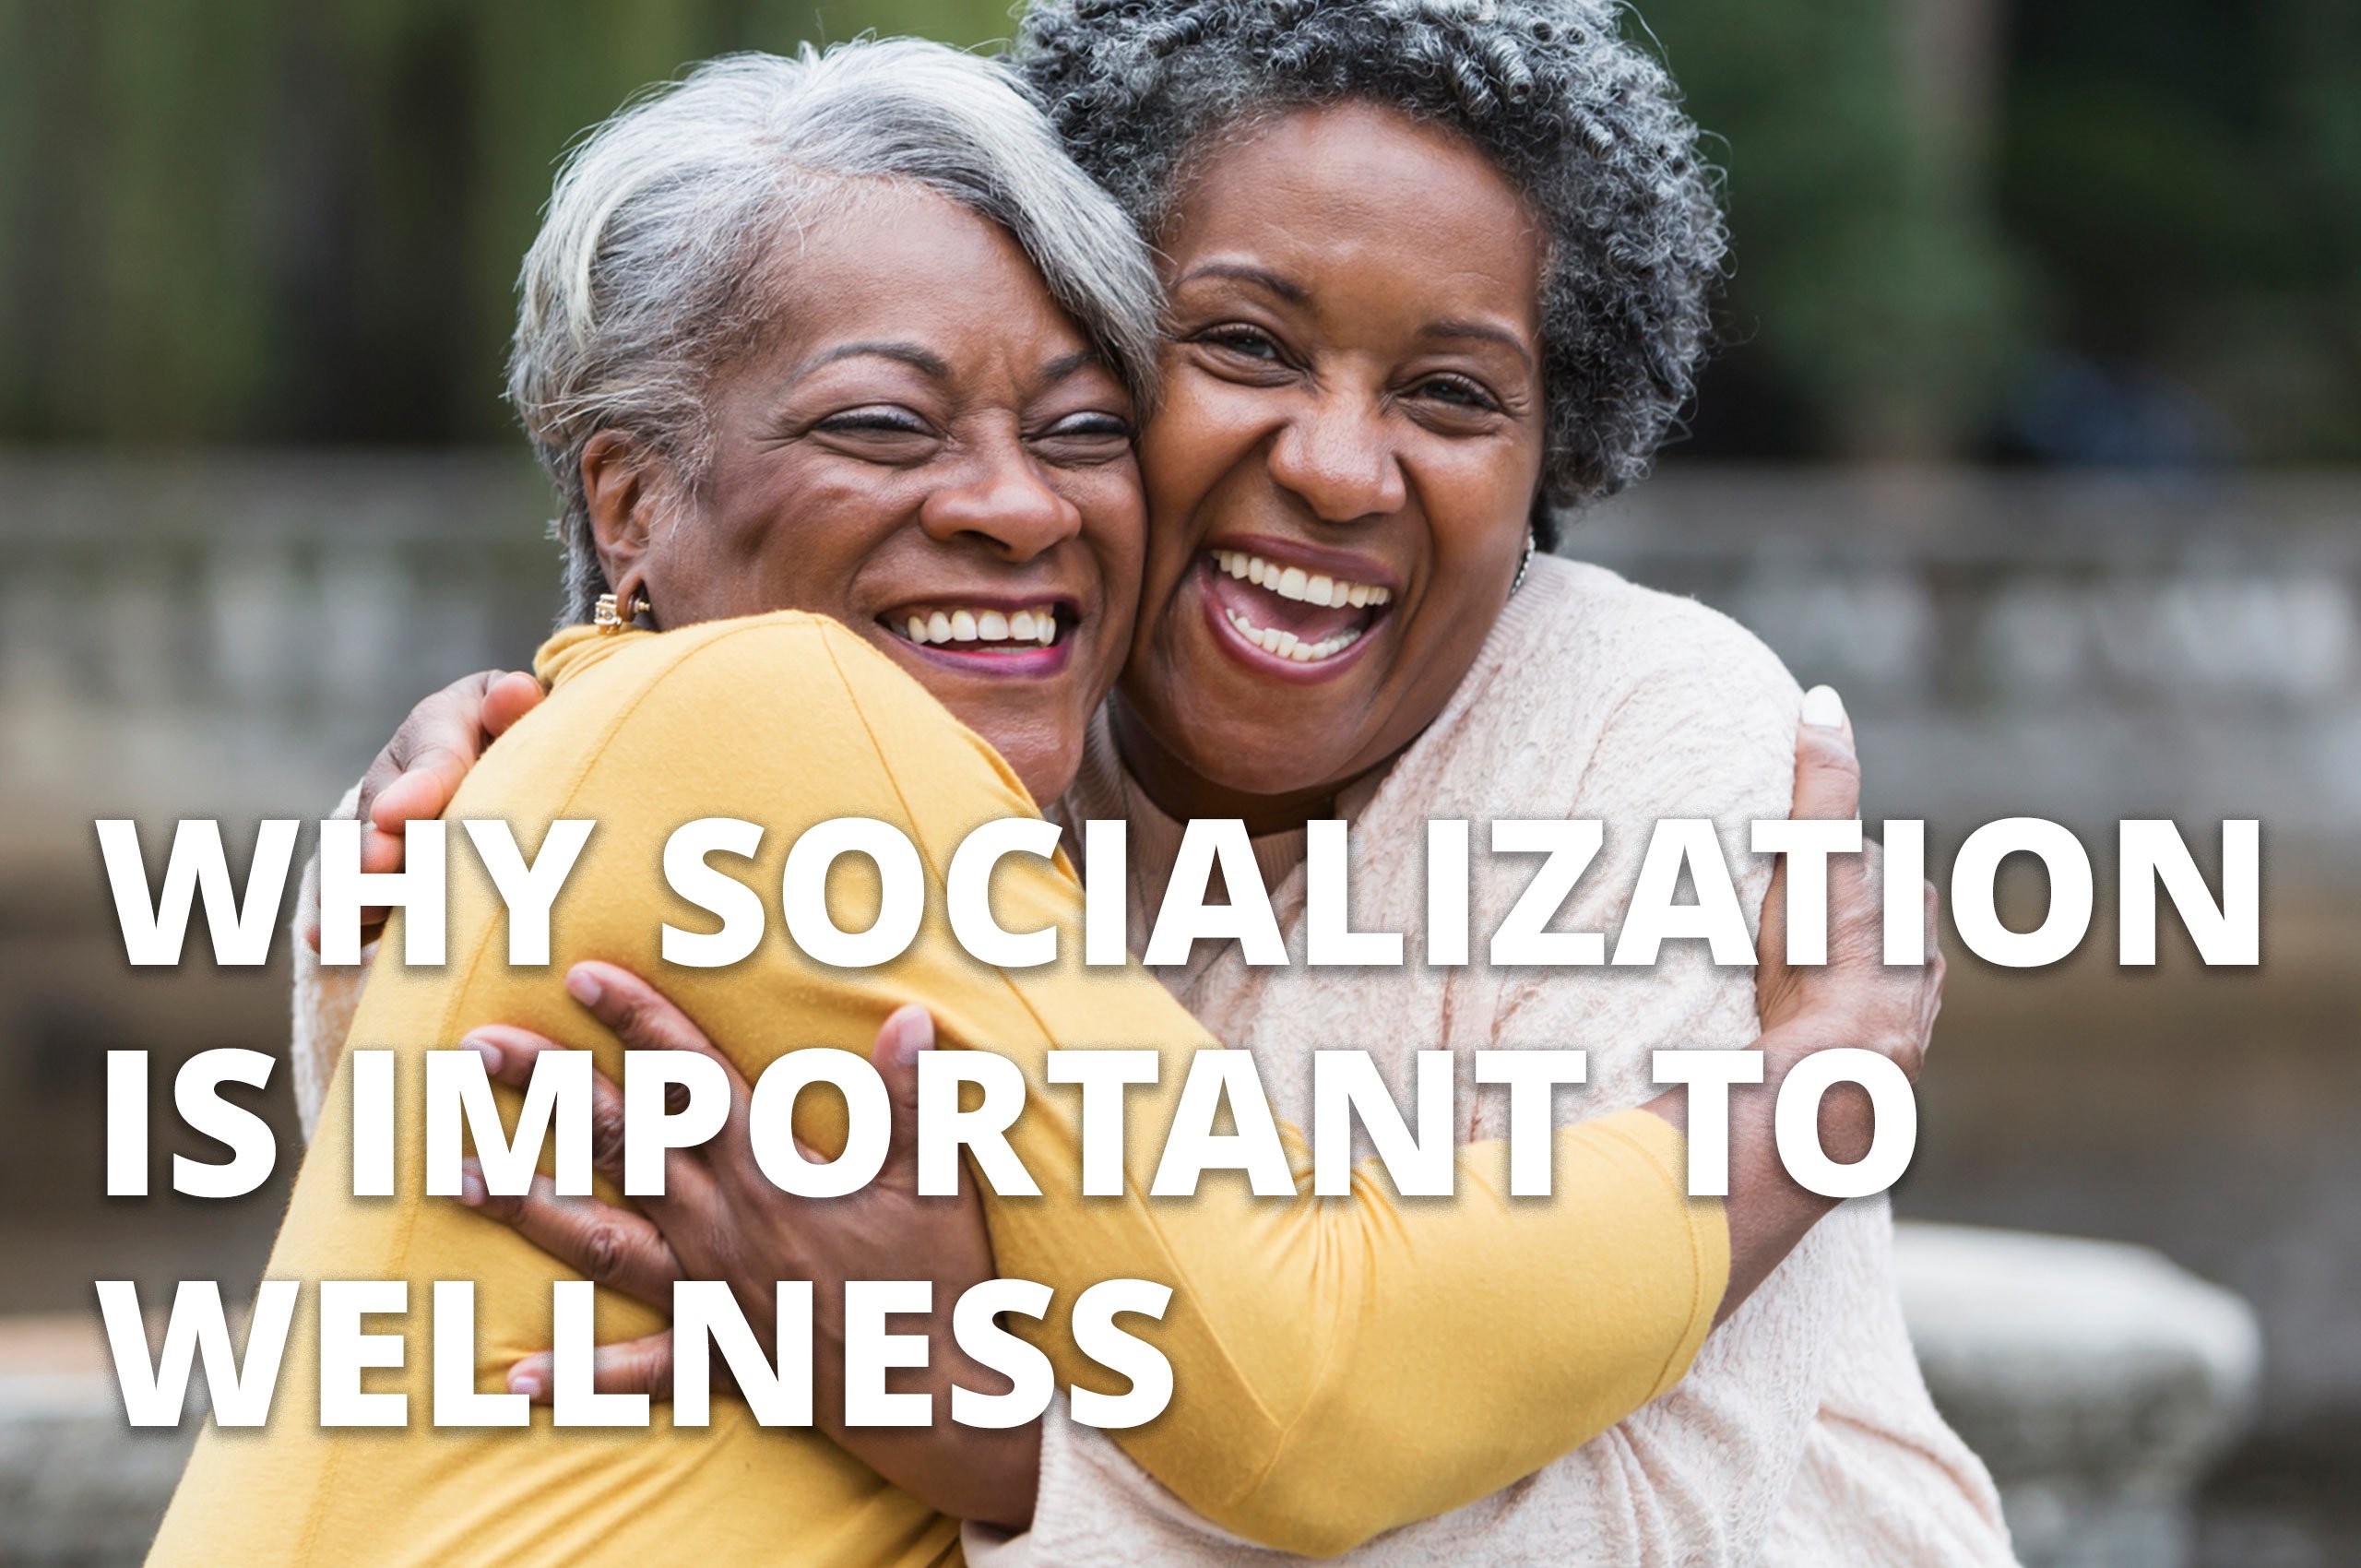 2560x1700-article-header-thumbnails-SOCIALIZATION-AND-WELLNESS